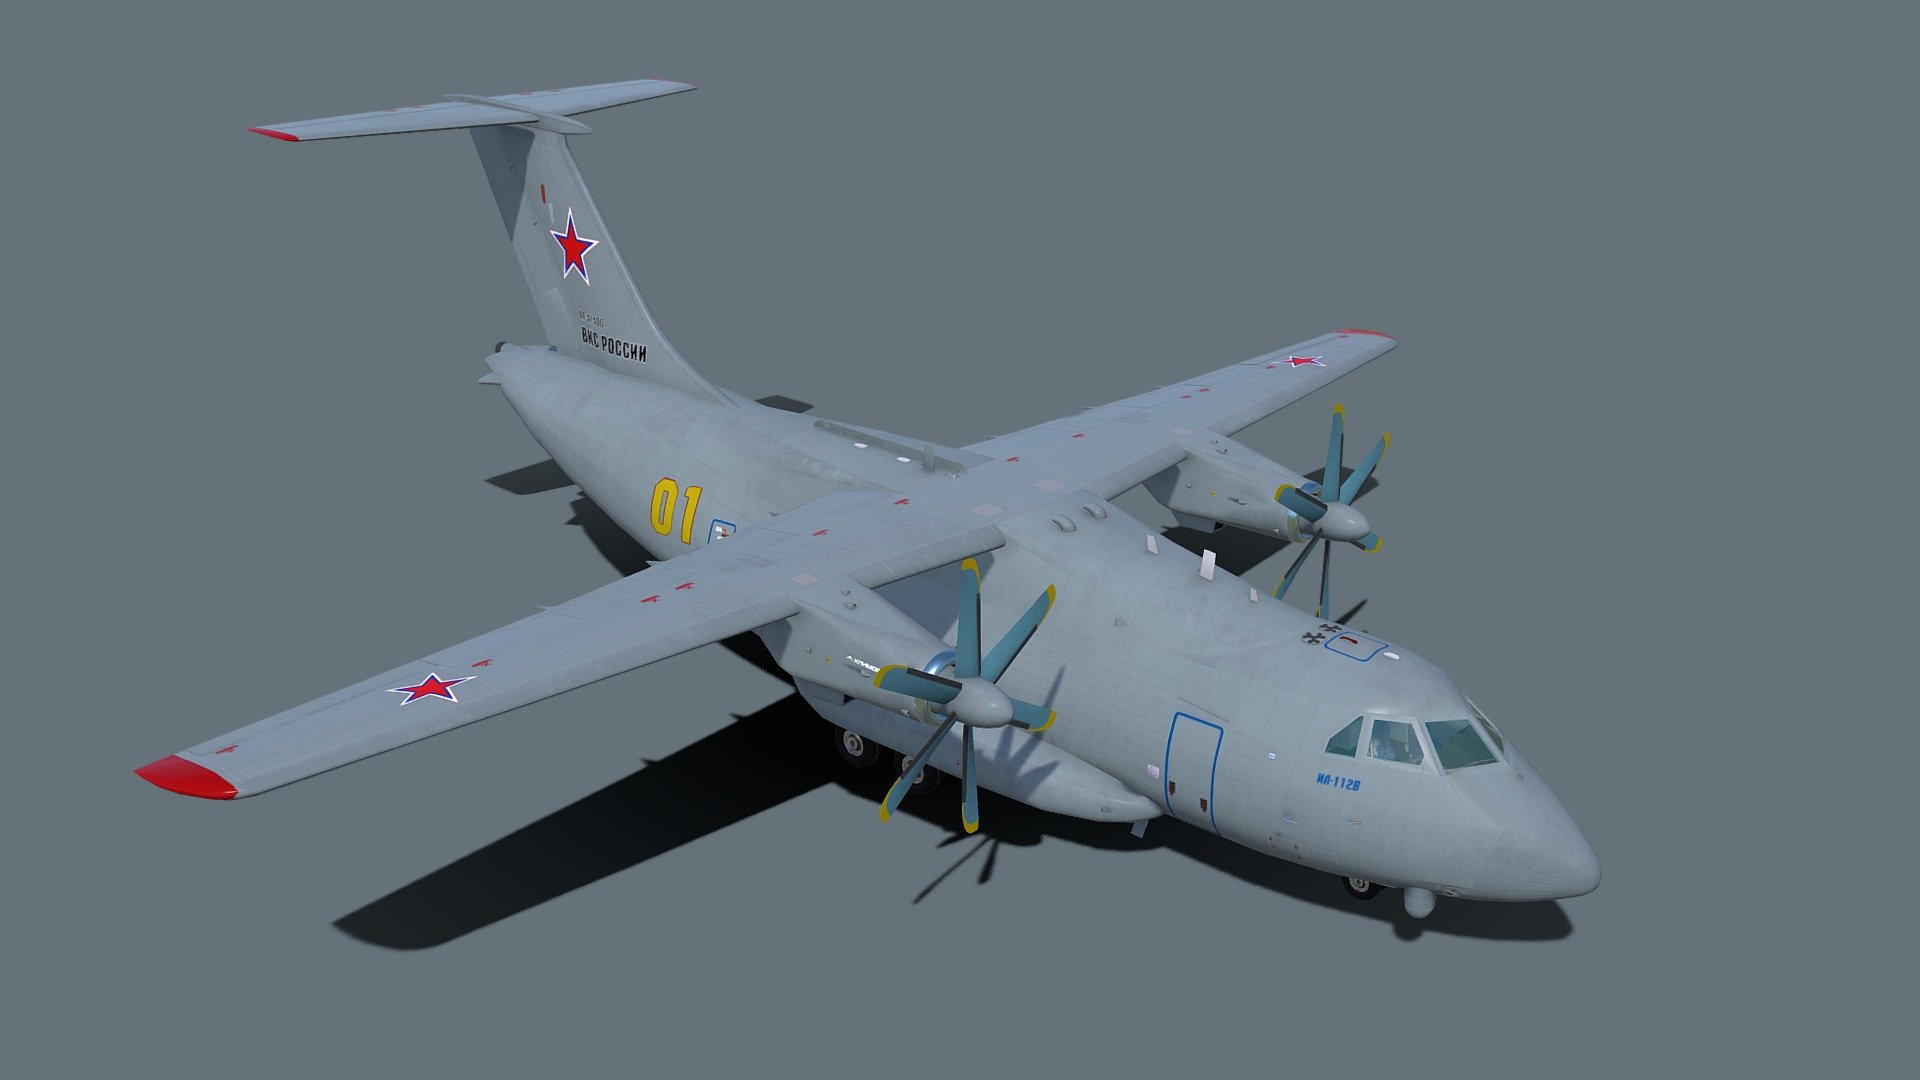 The Ilyushin Il-112 is a high-wing light military transport aircraft being developed by Ilyushin Aviation Complex (JSC IL) for air landing and airdrop of military air cargoes, equipment and personnel. The aircraft is newest of all historically Soviet-origin aircraft (as of July 2019), and being manufactured by Voronezh Aircraft Production Association in Voronezh 3d model